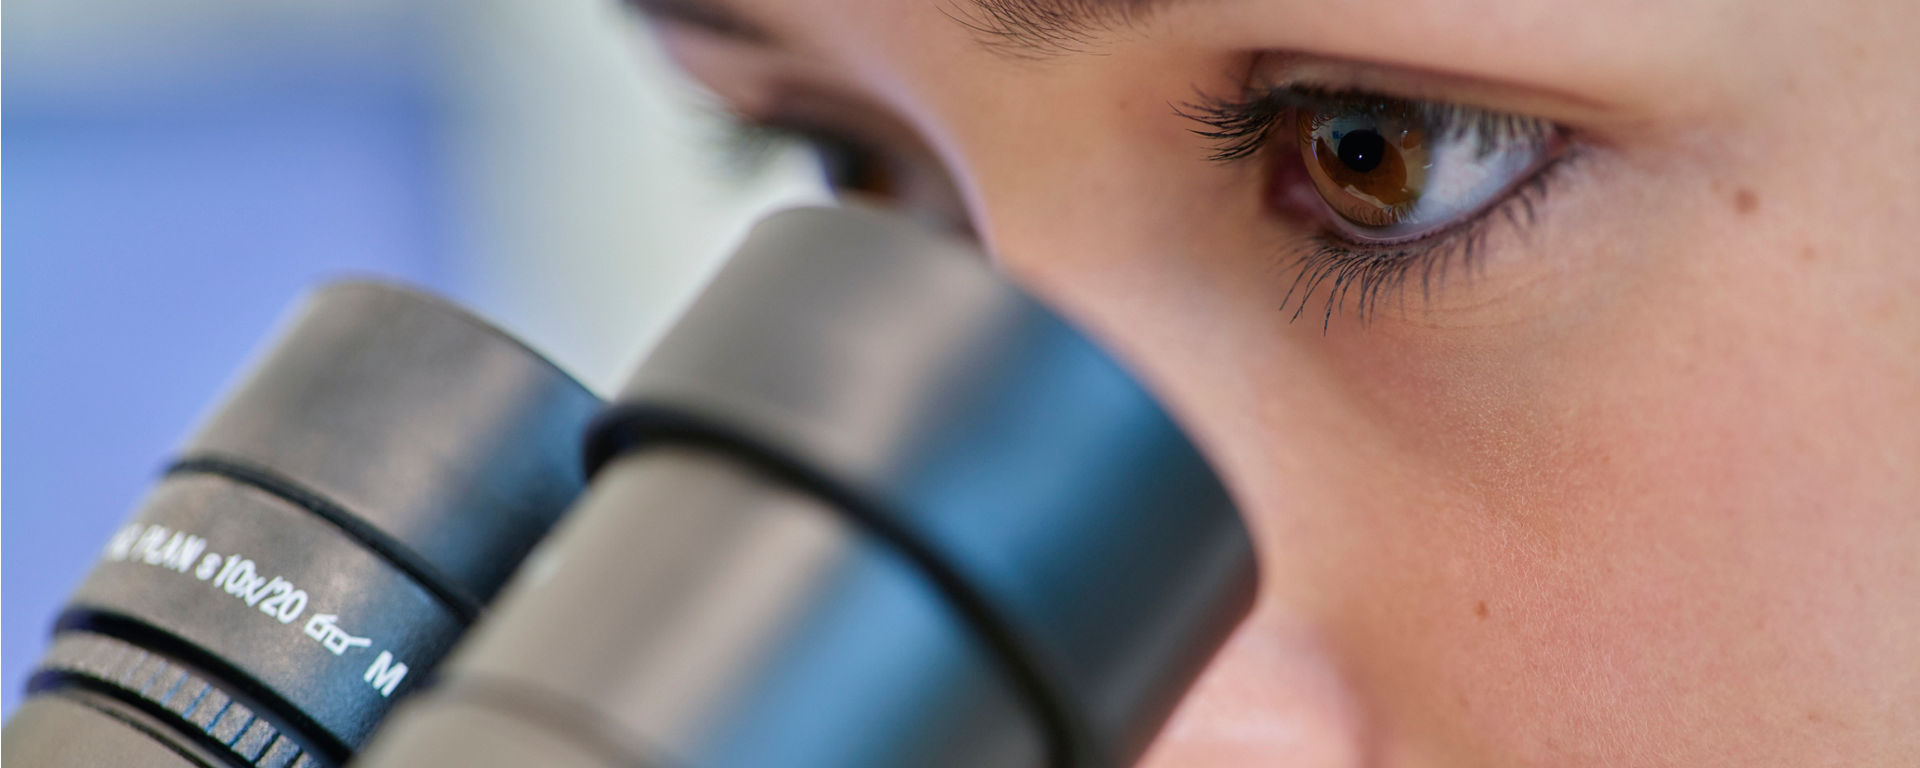 Researcher from CustomBiotech has a deep focused expression and is peering into a microscope within a laboratory setting